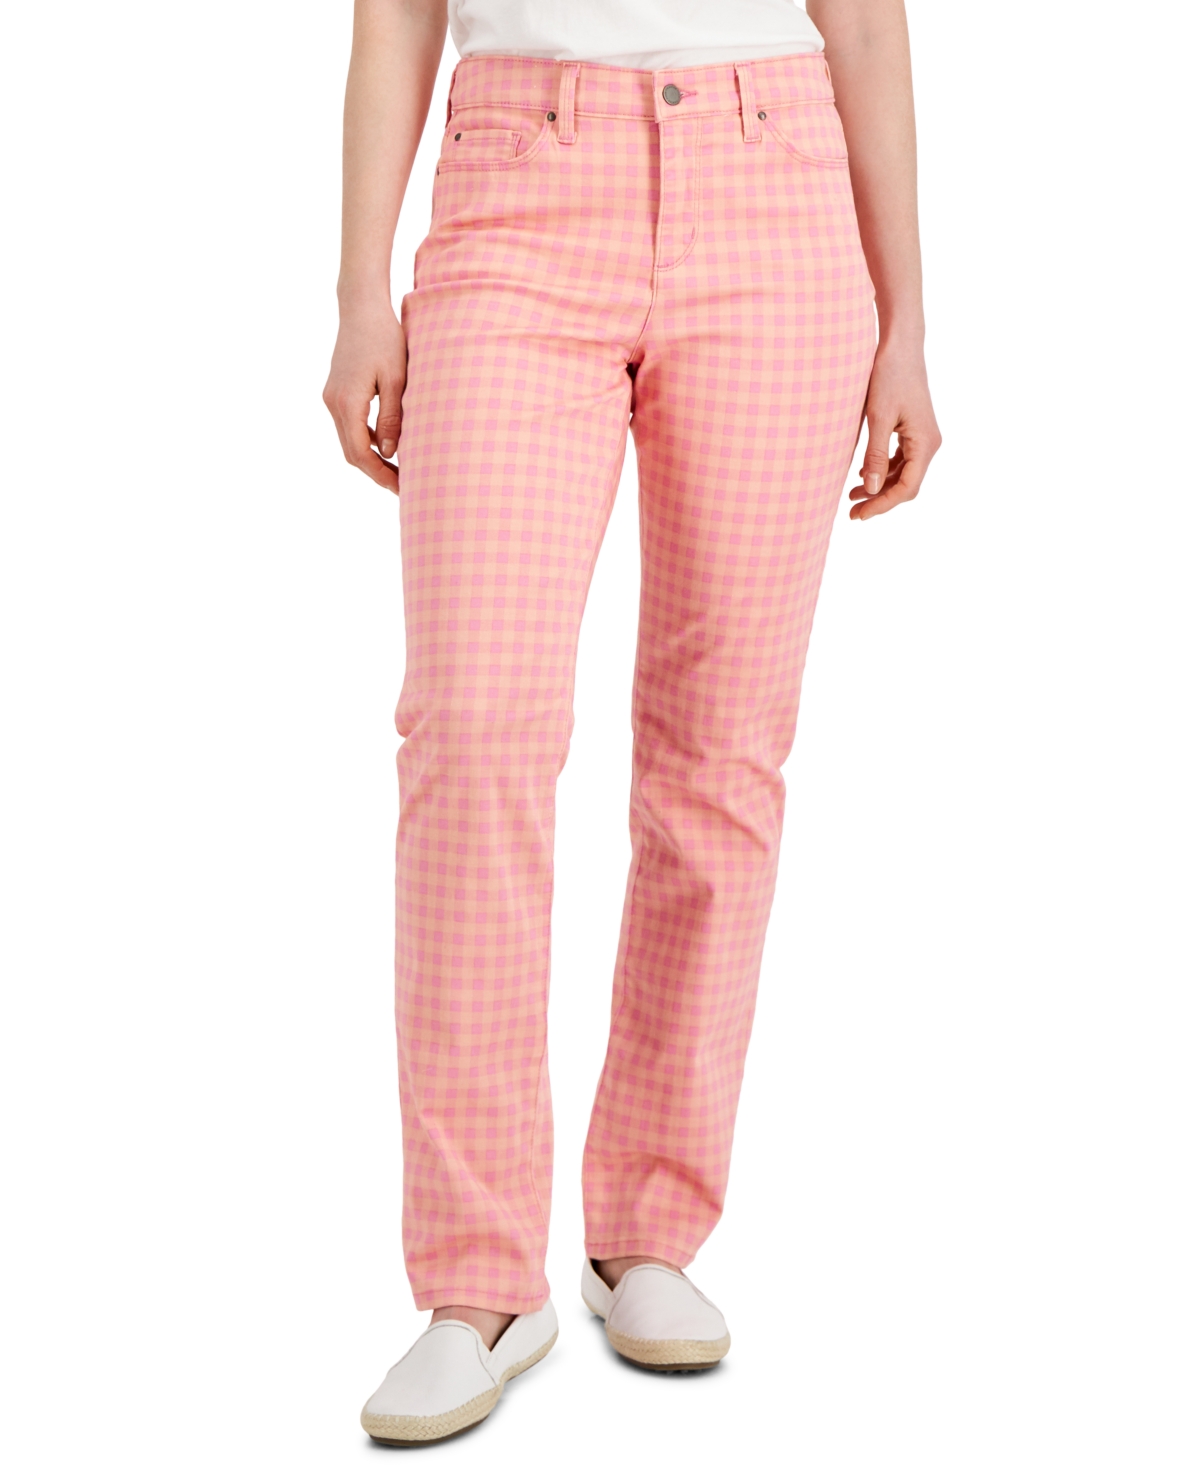 Charter Club Lexington Gingham Jeans, Created for Macy's